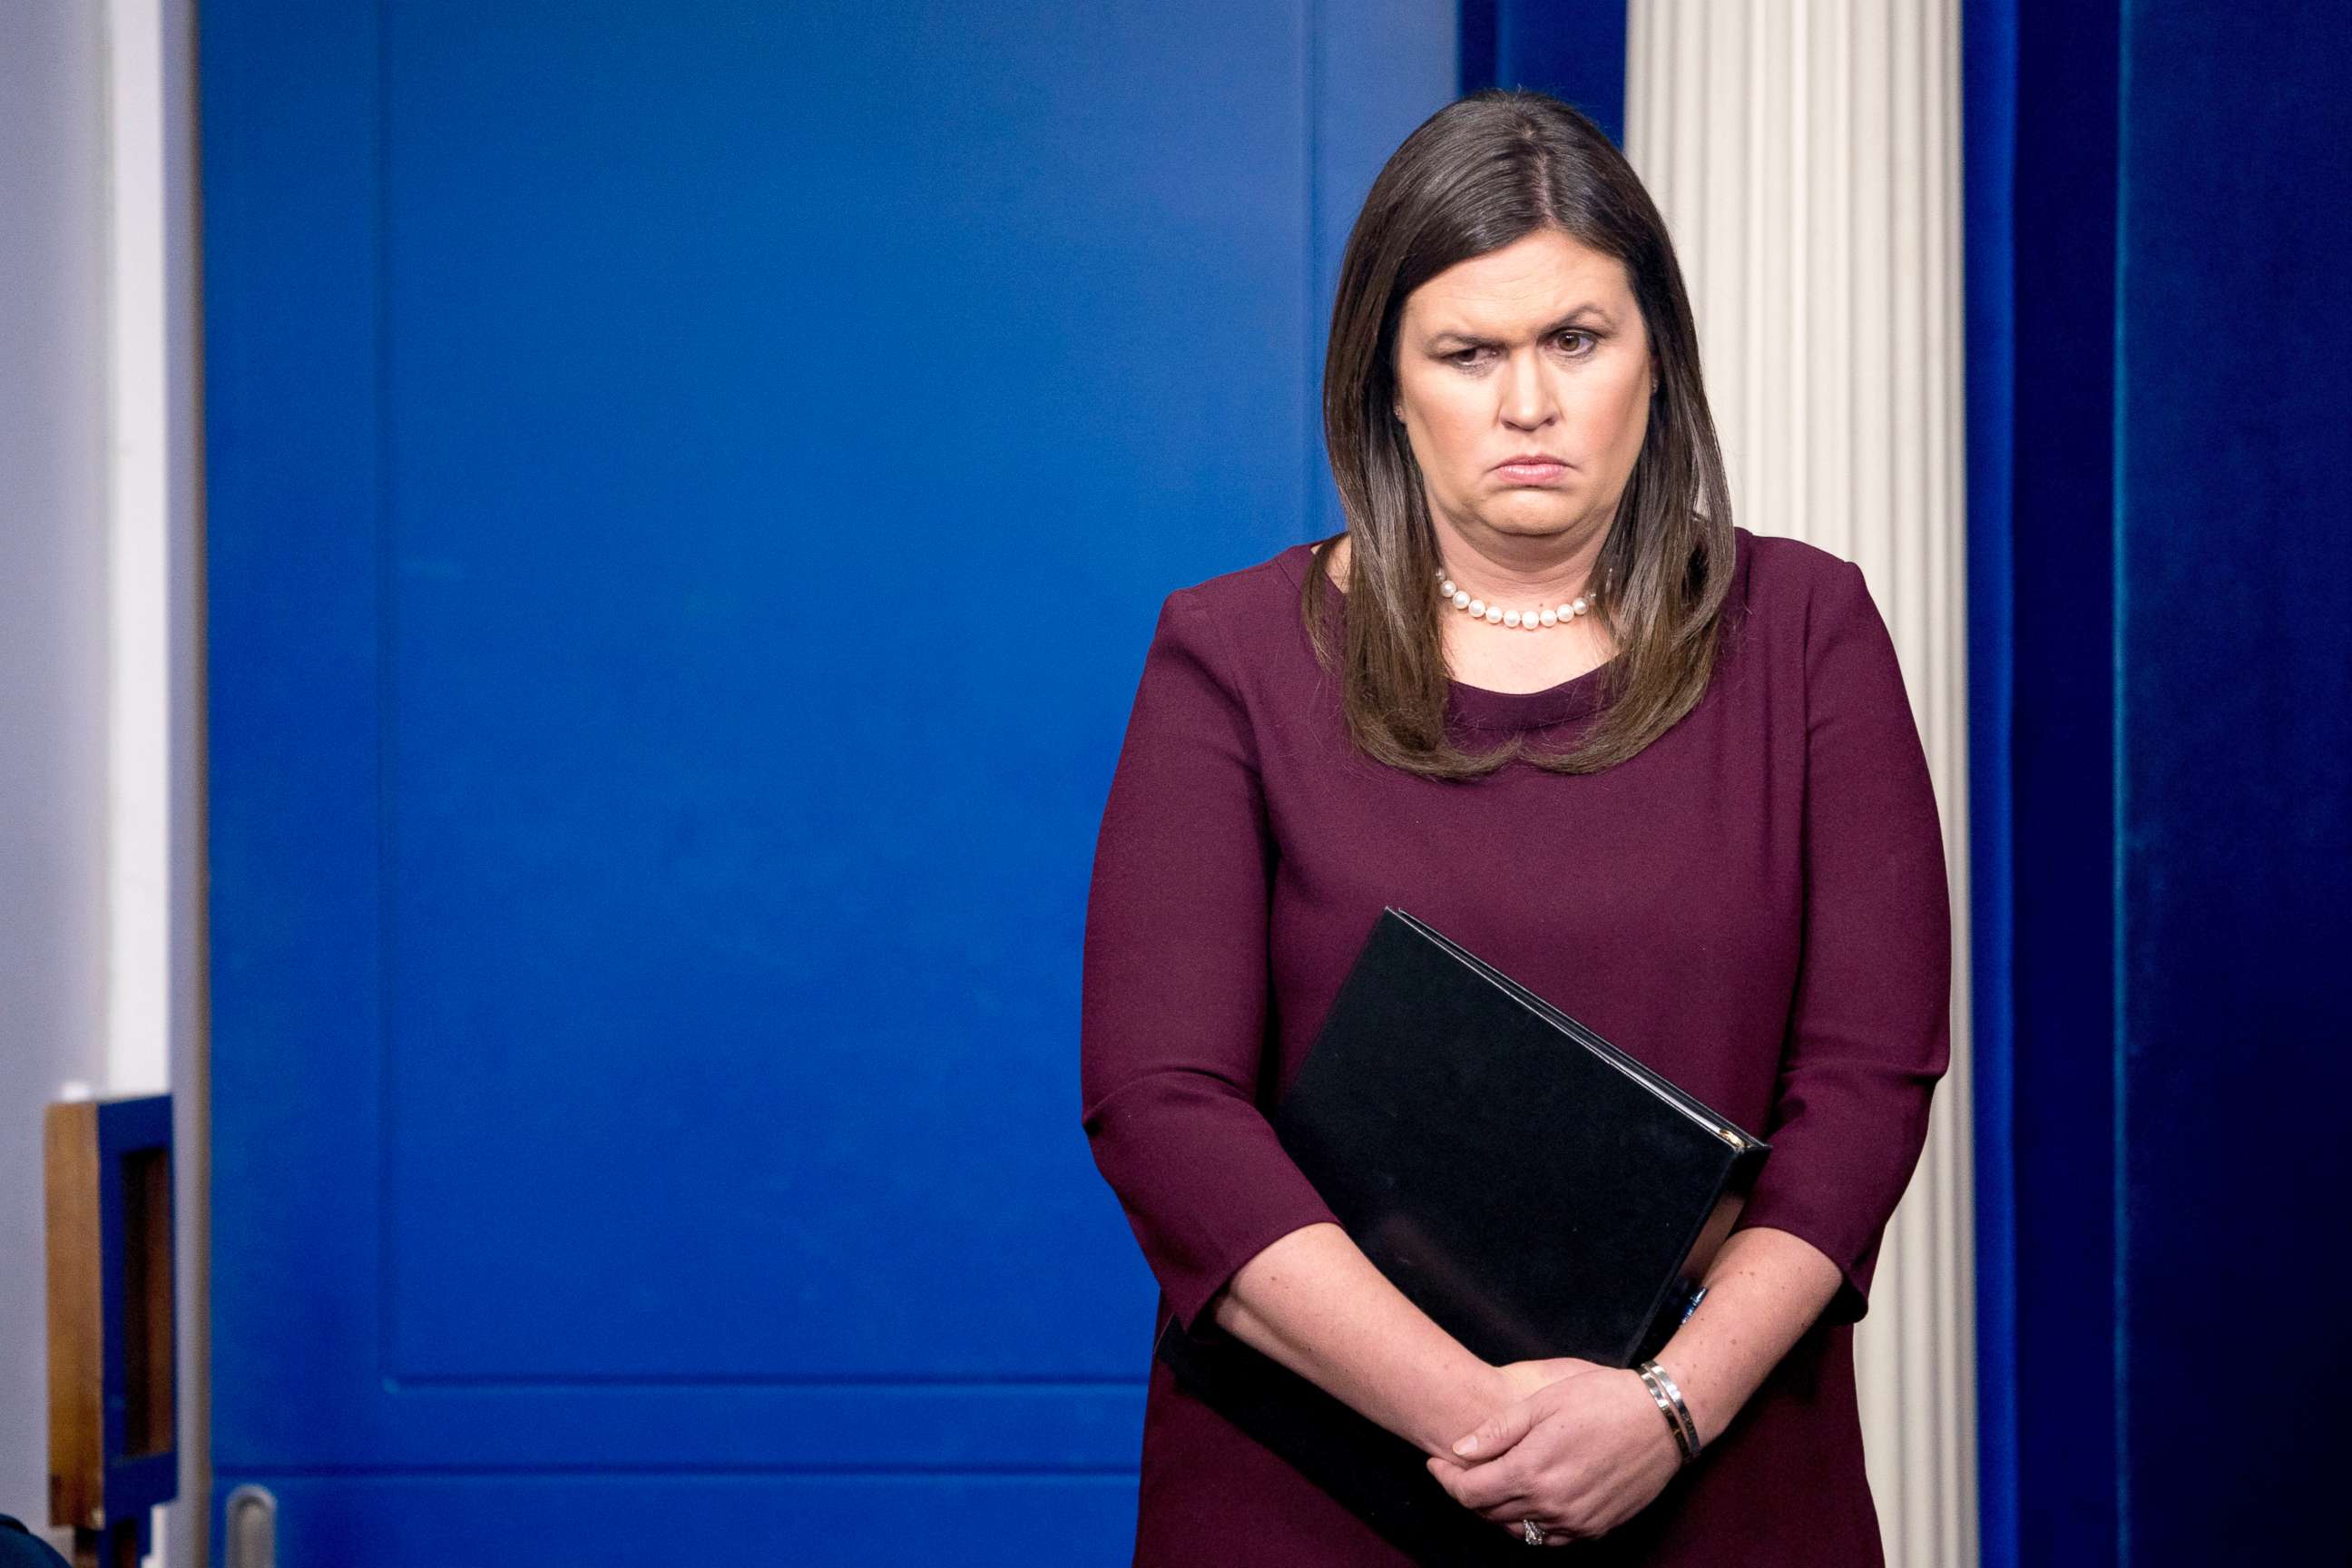 PHOTO: White House press secretary Sarah Huckabee Sanders attends the daily press briefing at the White House in Washington, Aug. 14, 2018, where officials speak to reporters on recently repatriated remains from North Korea.